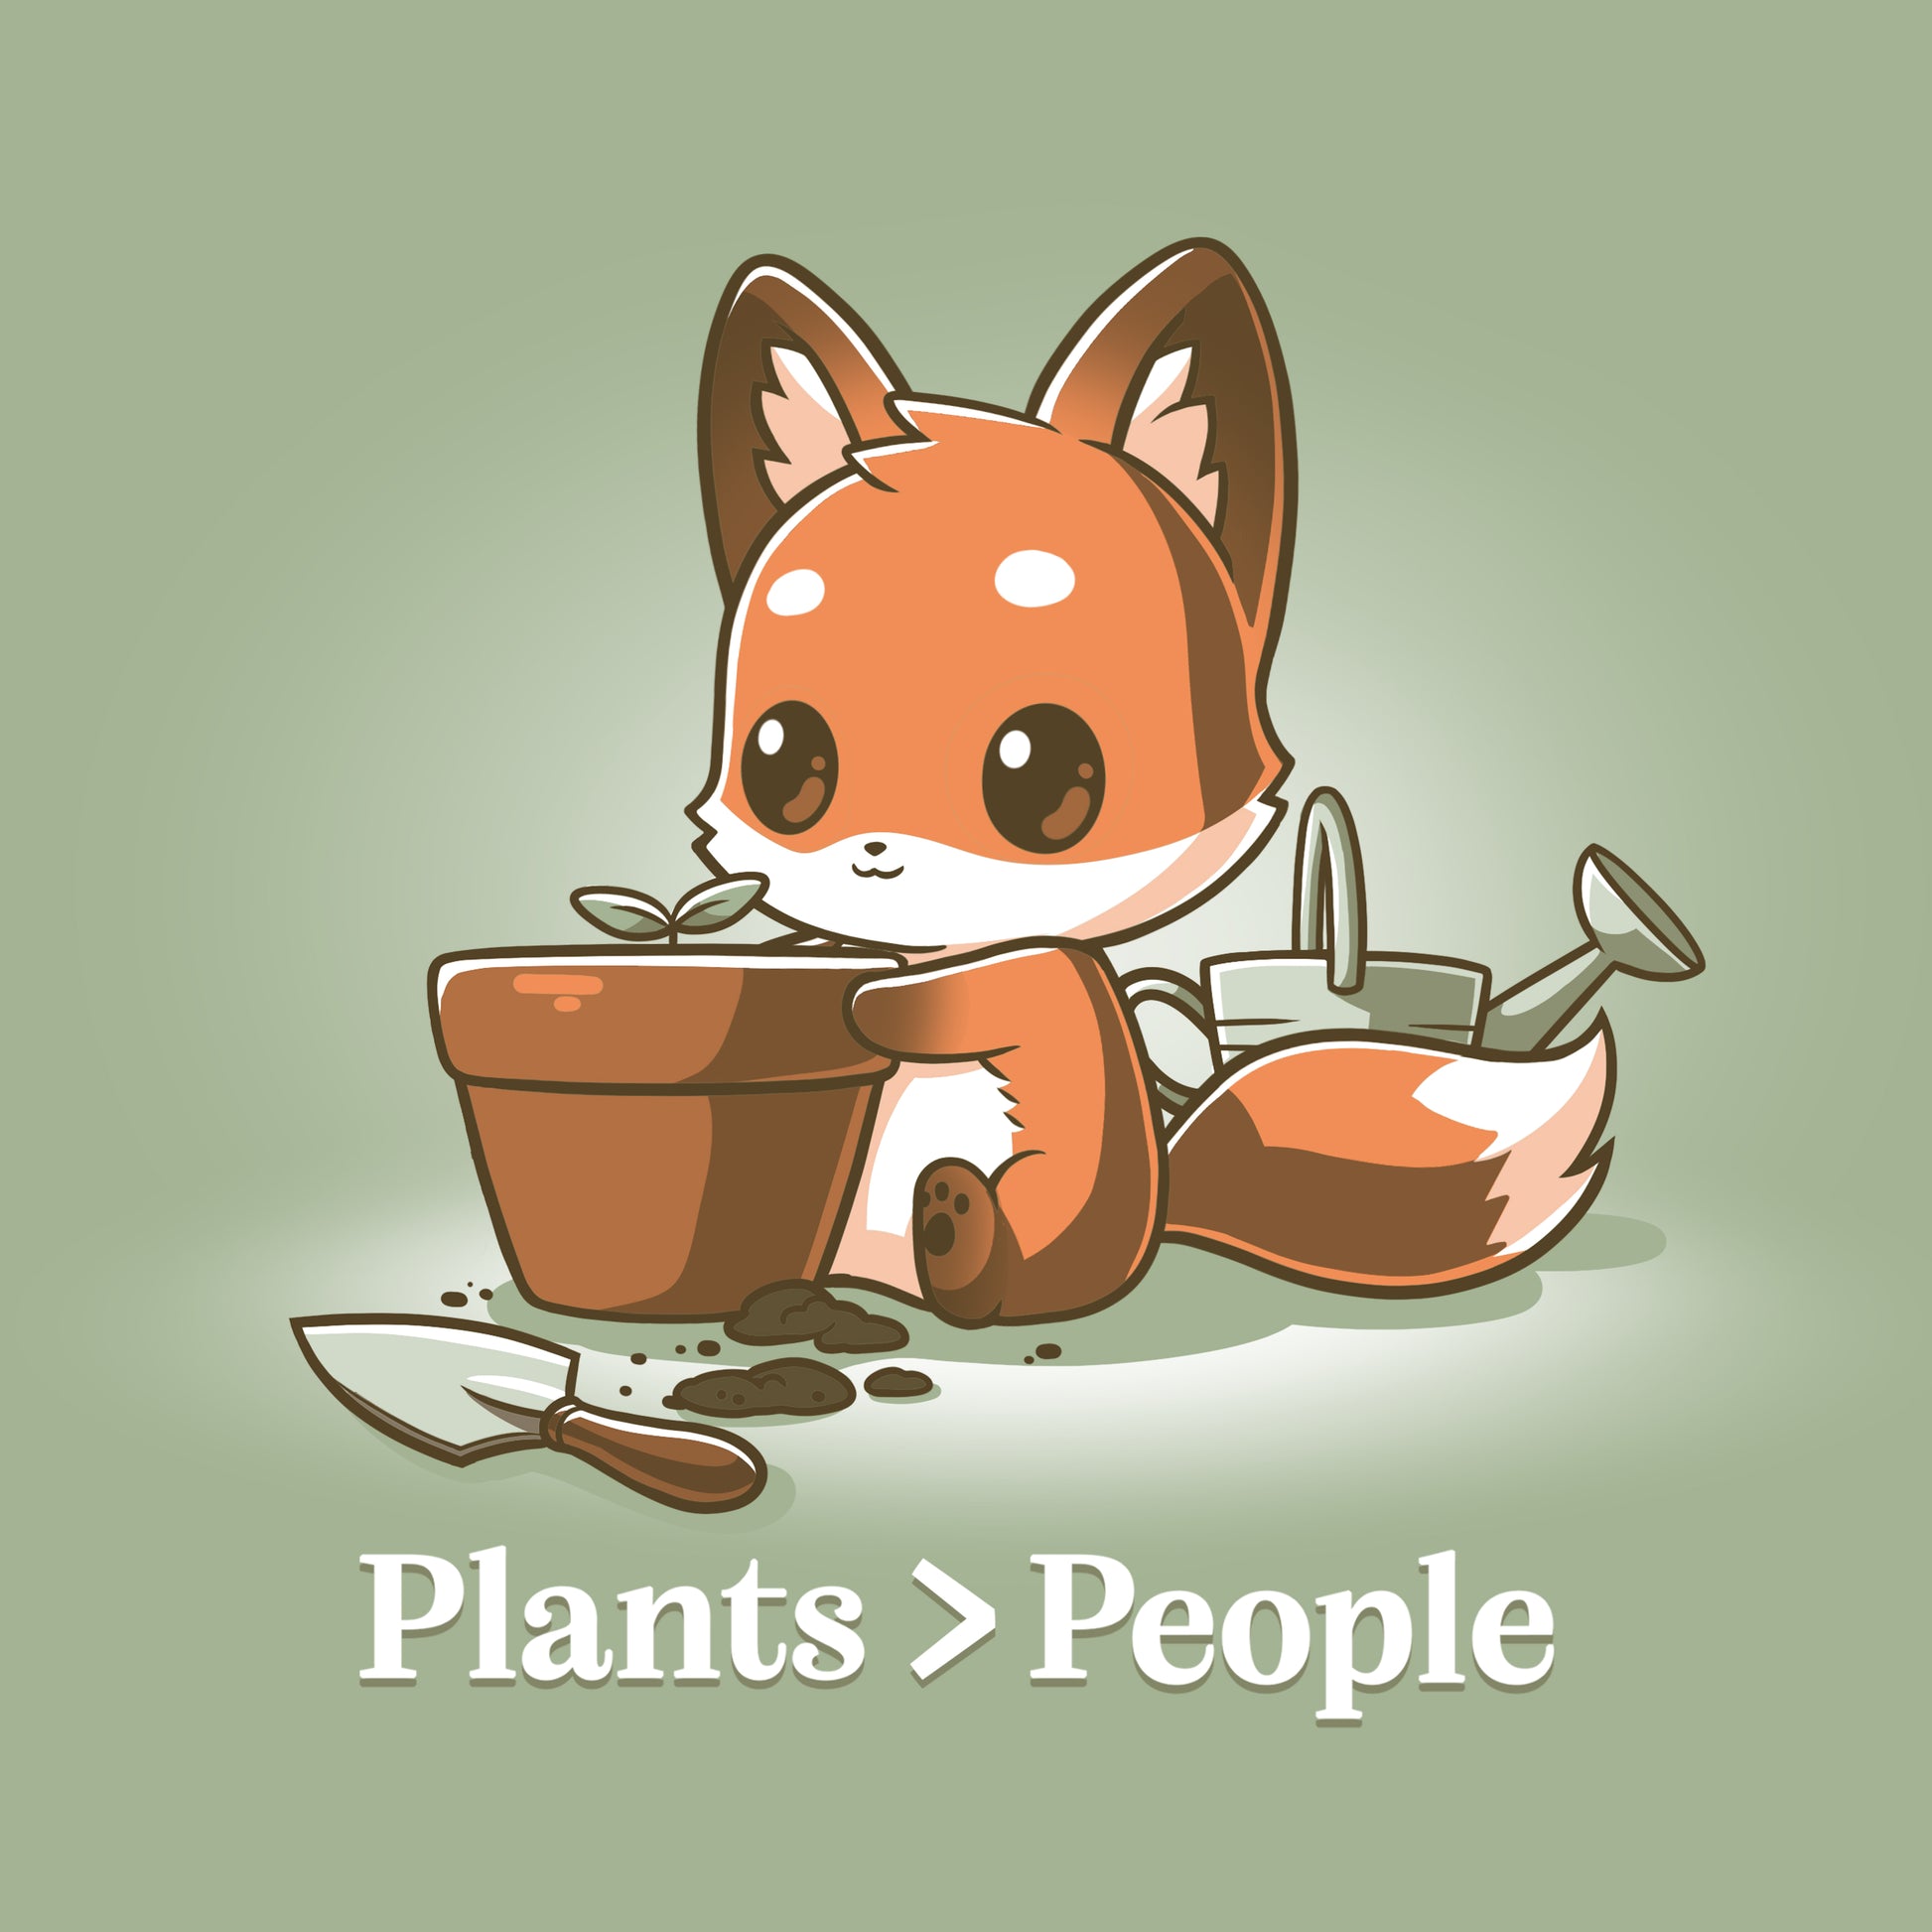 A cartoon fox holding a plant in a pot of soil, wearing a TeeTurtle sage green t-shirt called "Plants > People".